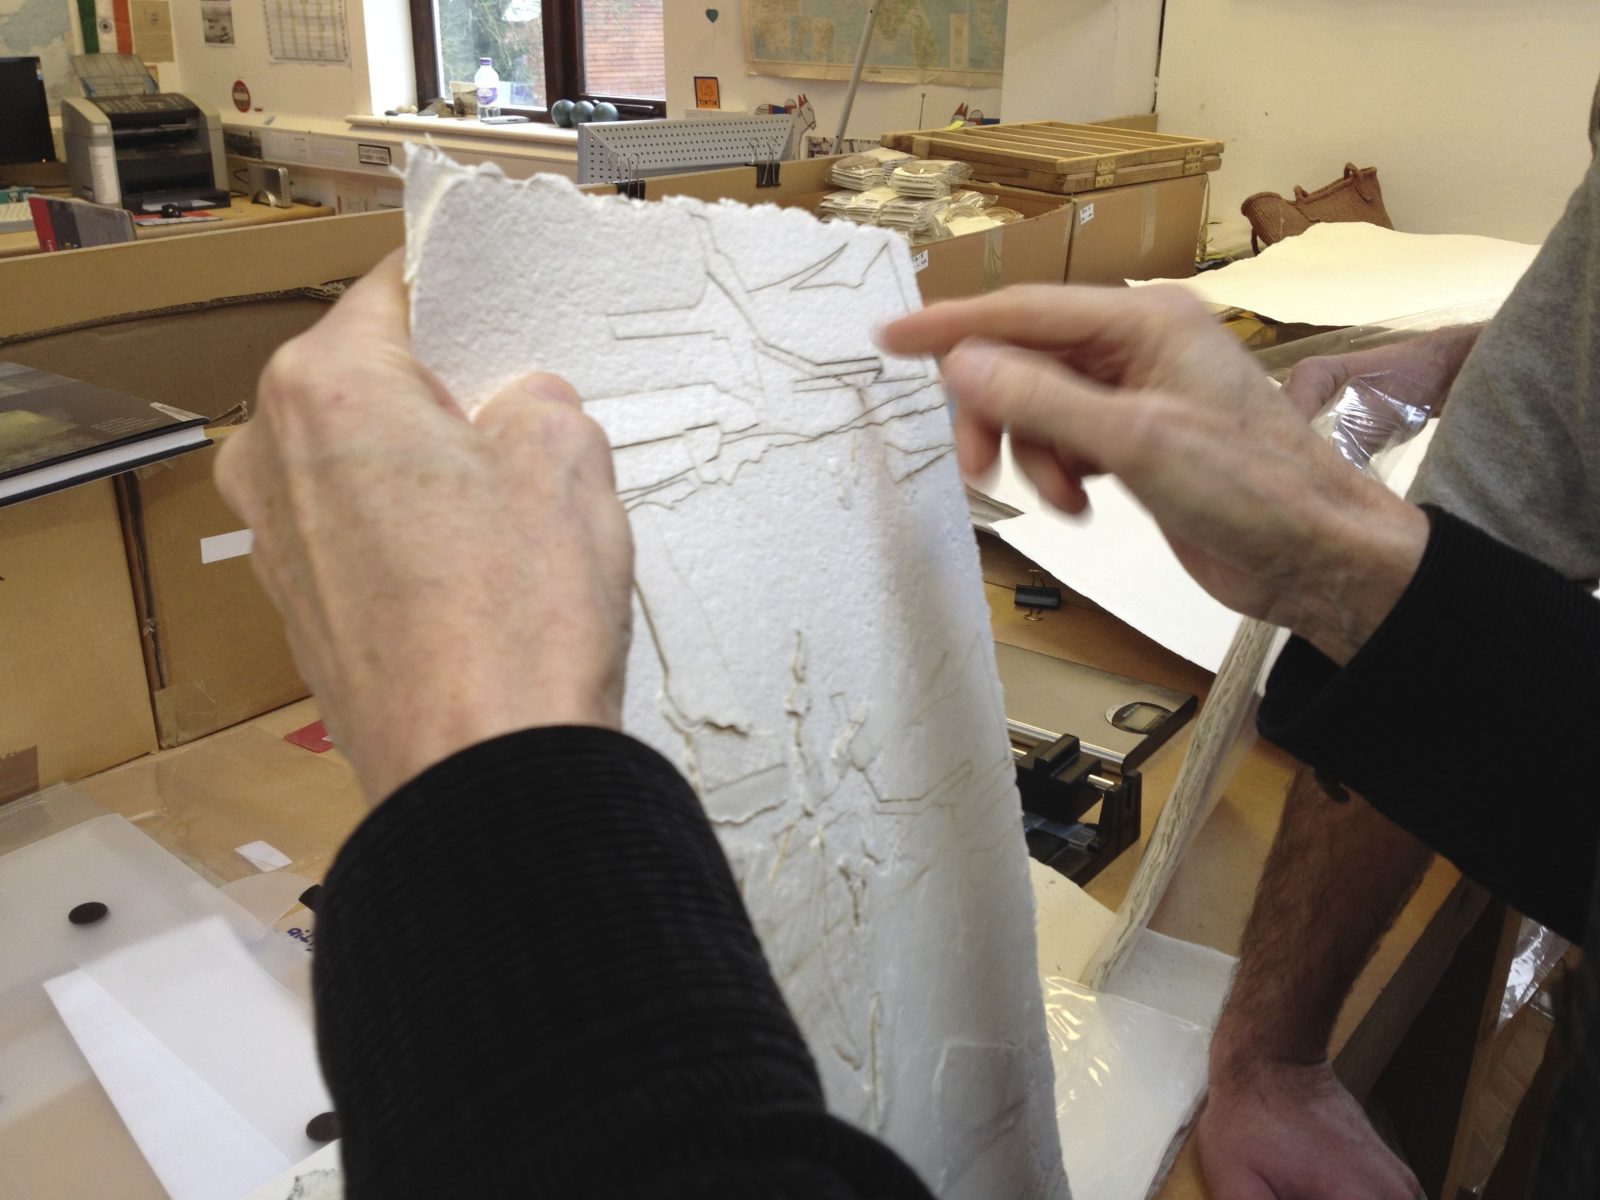 February 2014 | Visiting Khadi Papers in Chilgrove, Chichester